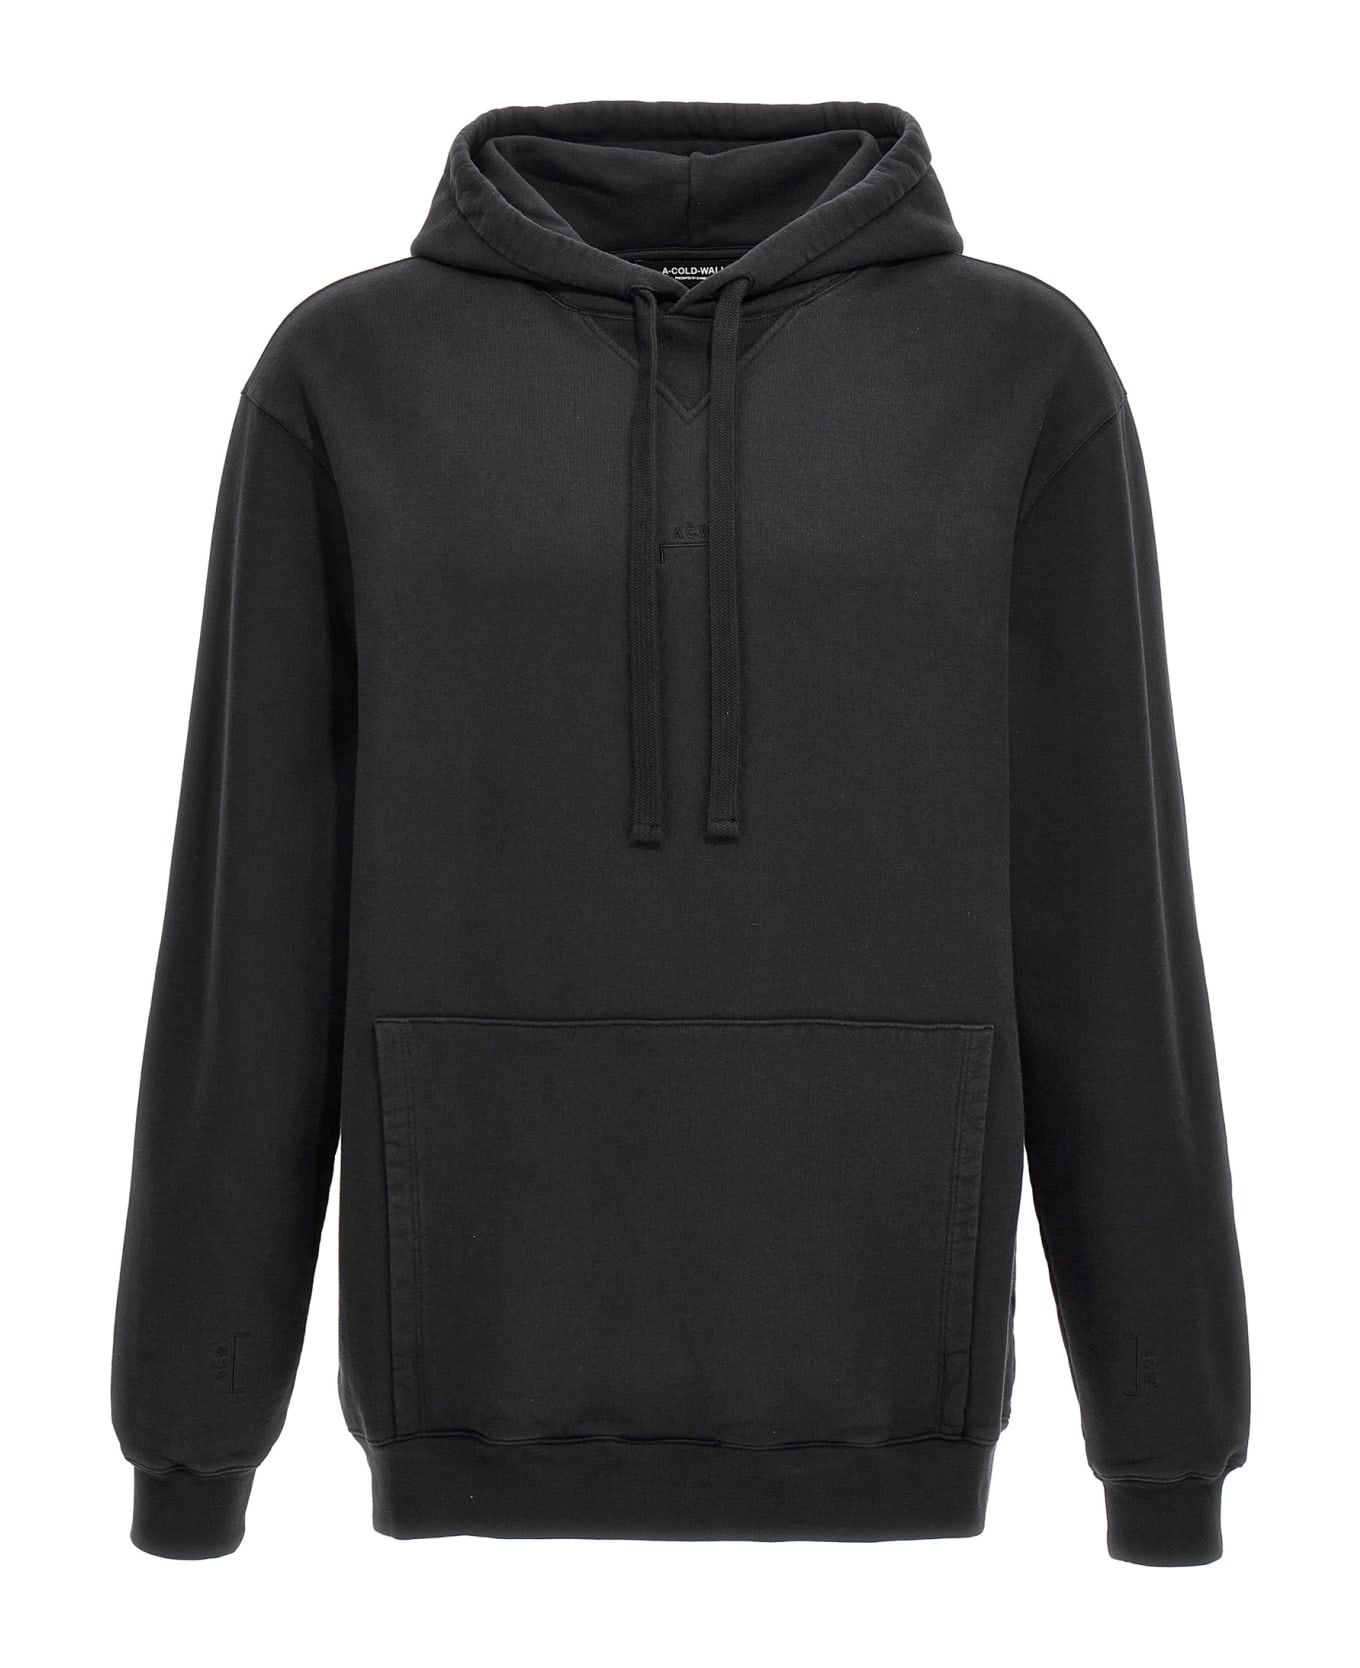 A-COLD-WALL 'essential' Hoodie - Black  